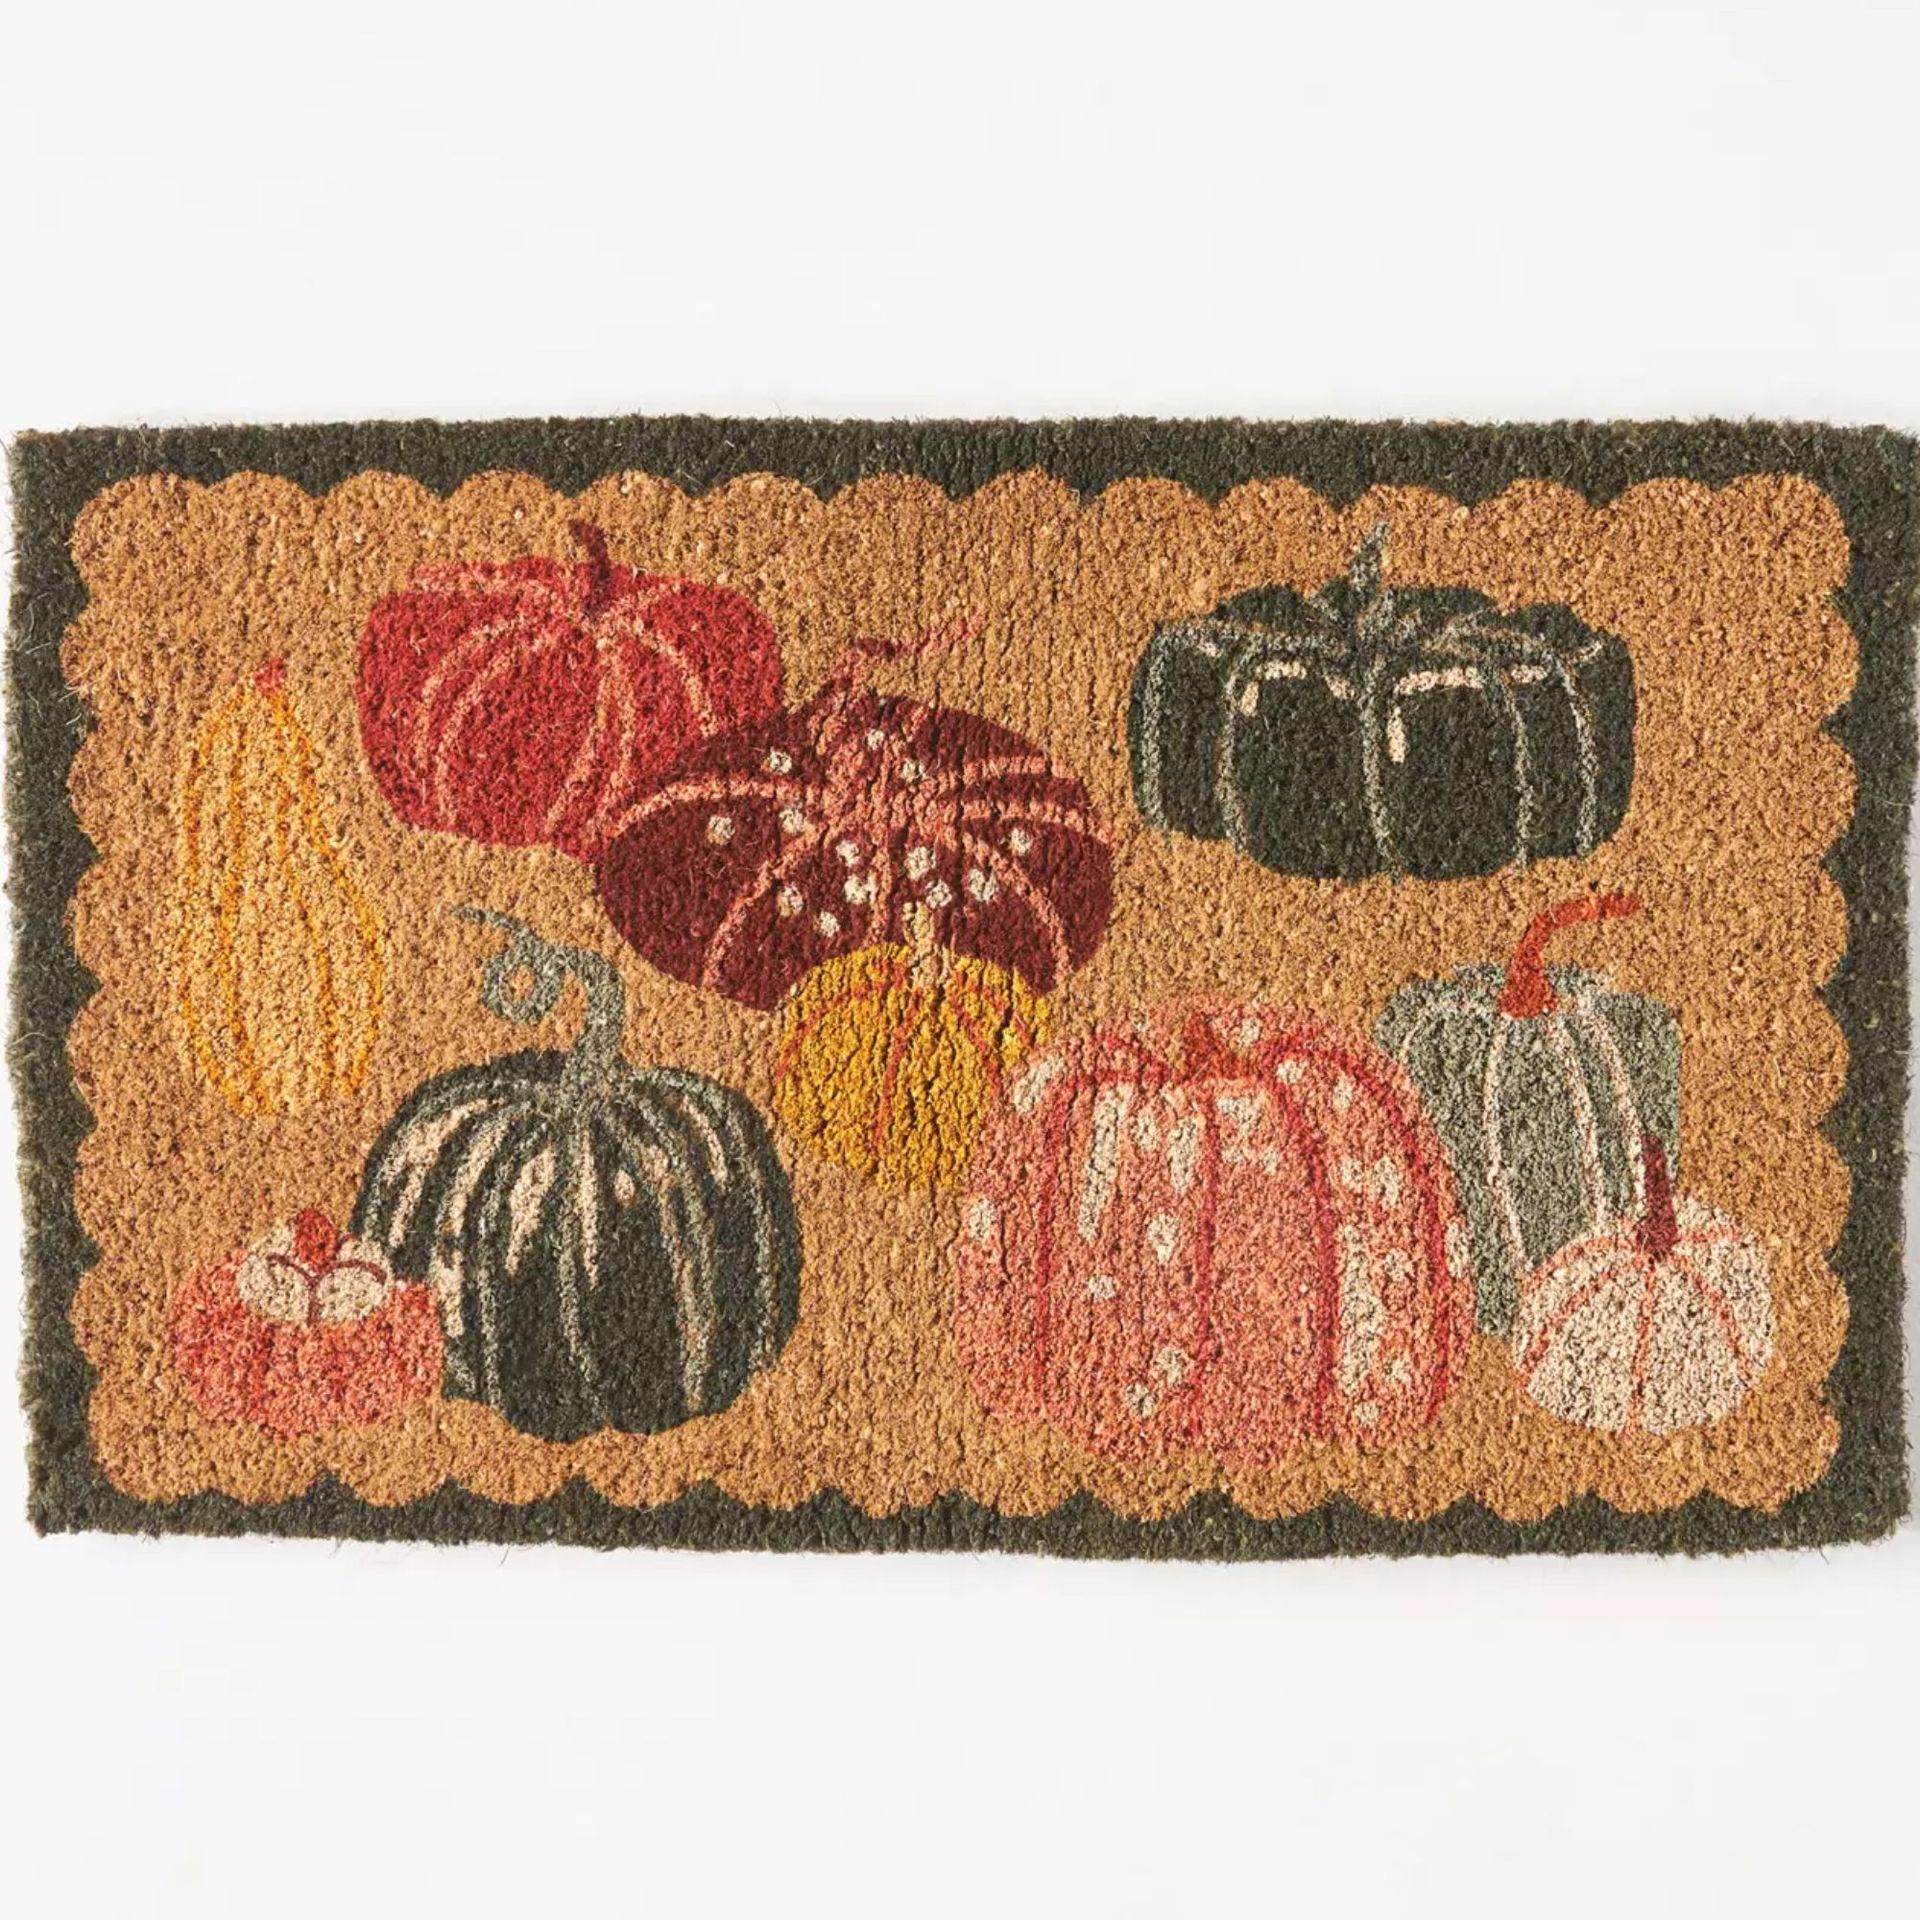 Anthropologie's Halloween collection – 18 of our top picks